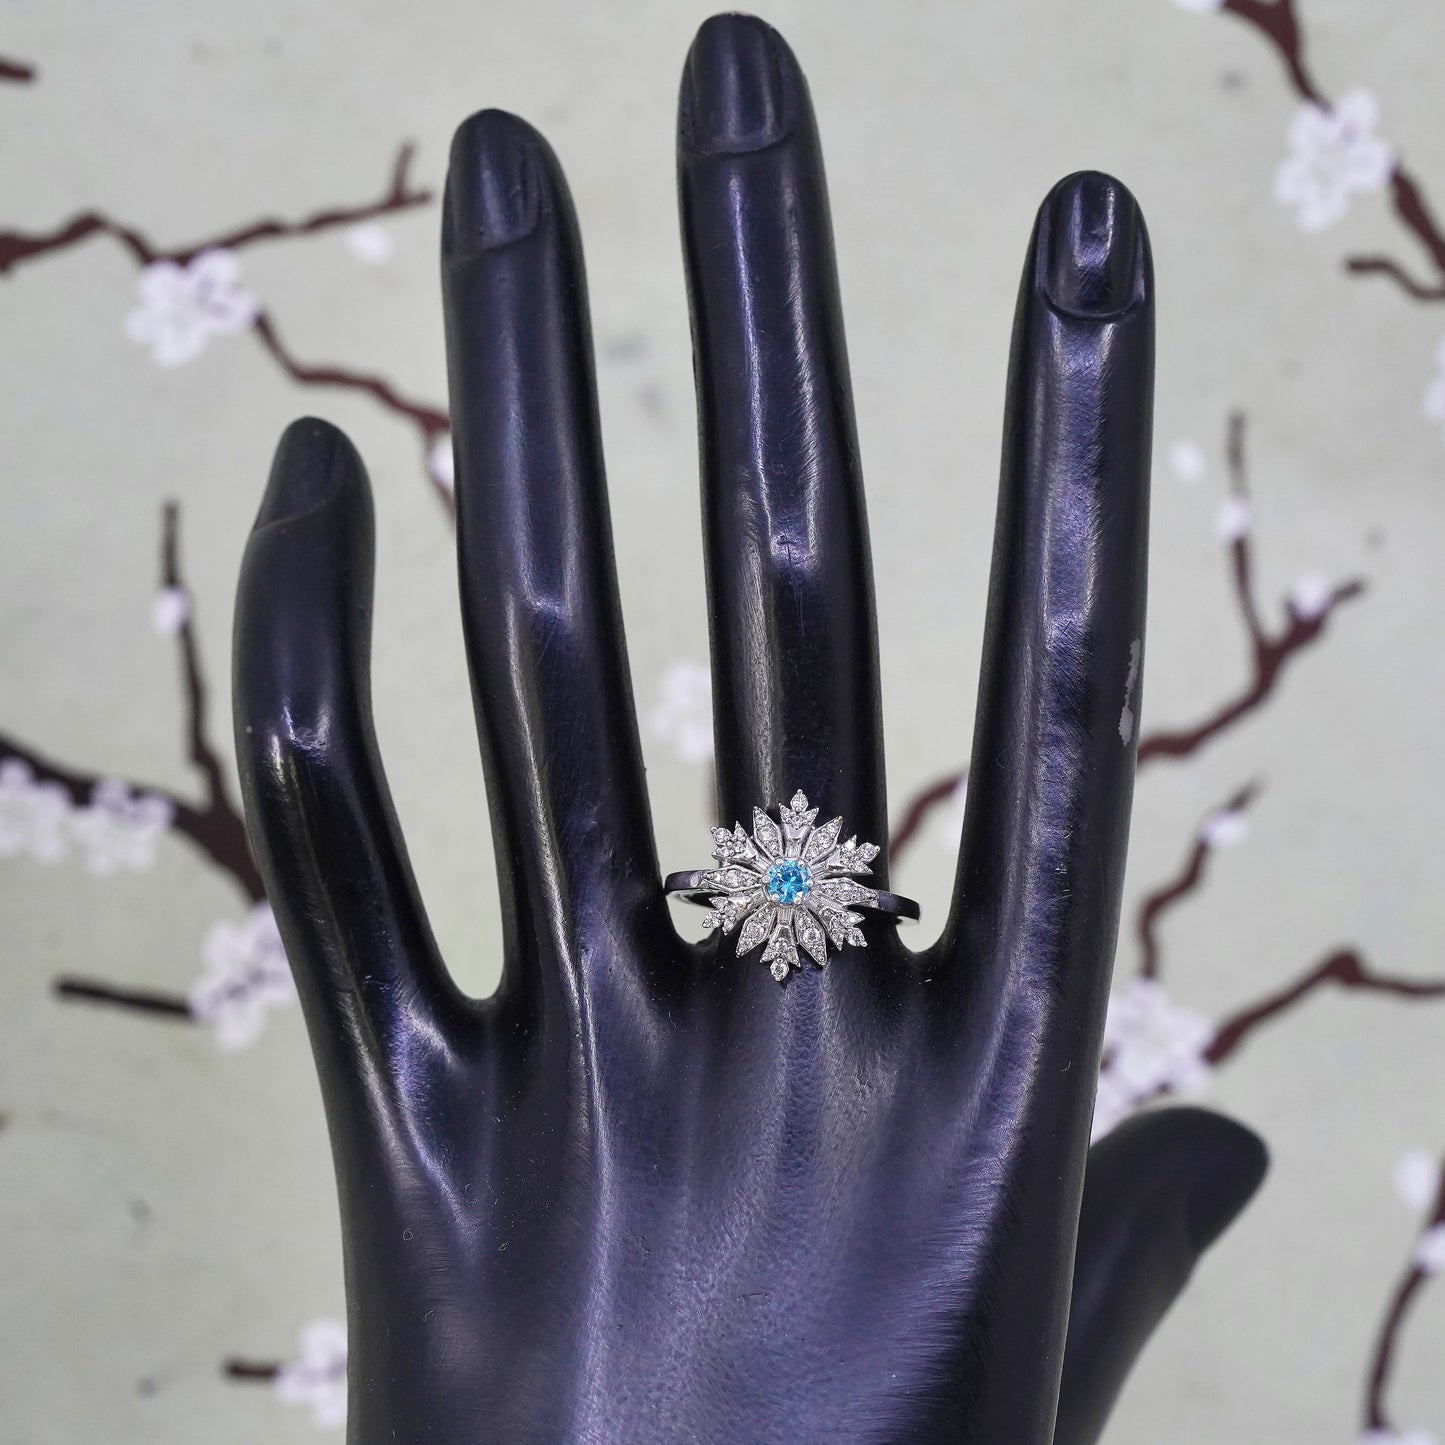 Size 8.75, 925 Sterling silver snowfalke ring with CZ cluster, engagement ring